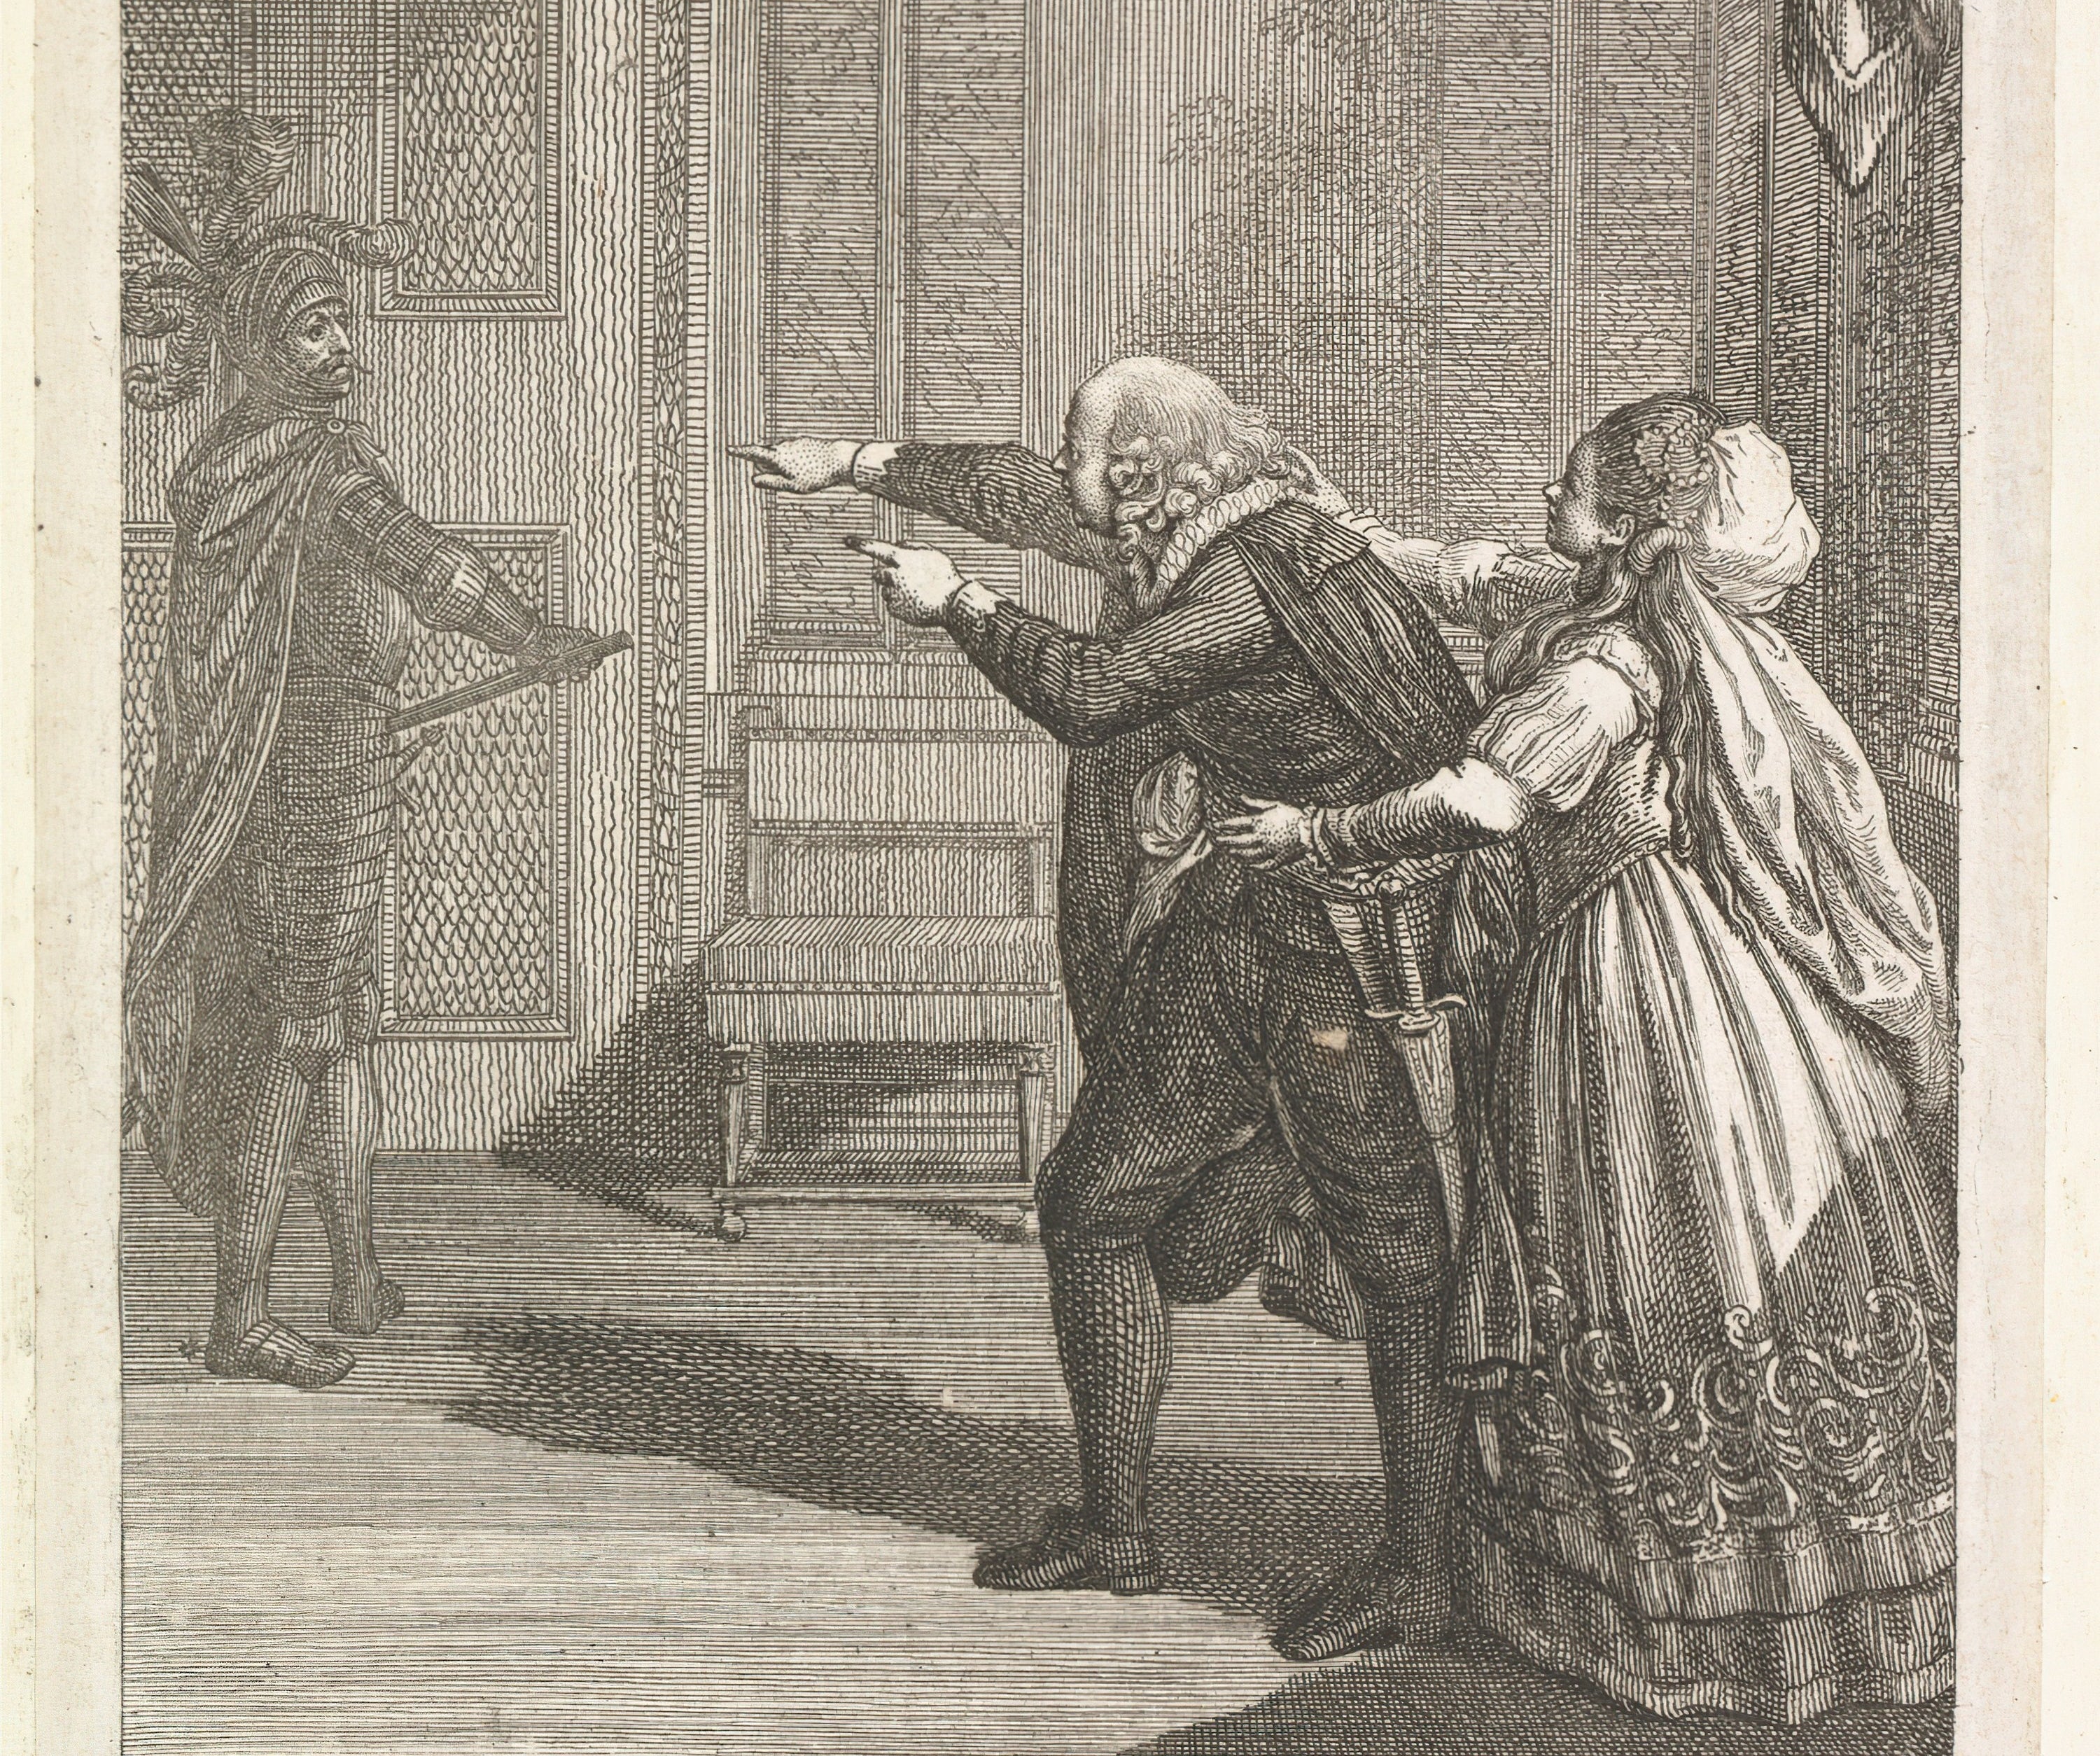 Illustration from Hamlet by William Shakespeare